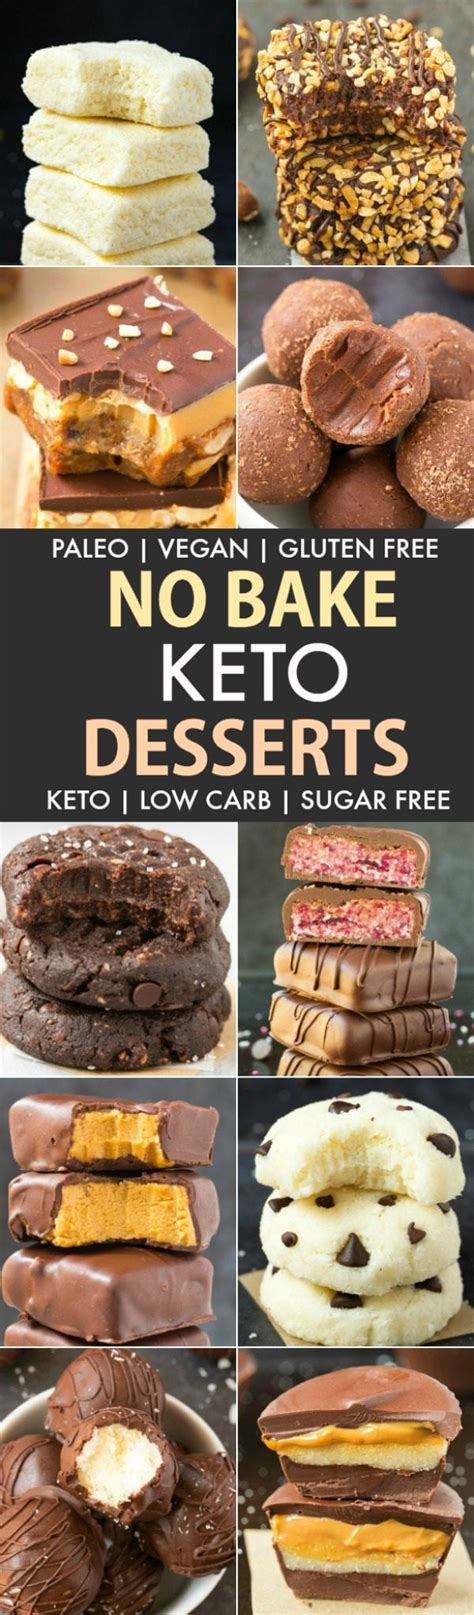 Keto is a way of life, not just another fad diet. Easy No Bake Low Carb Keto Desserts (Paleo, Vegan)